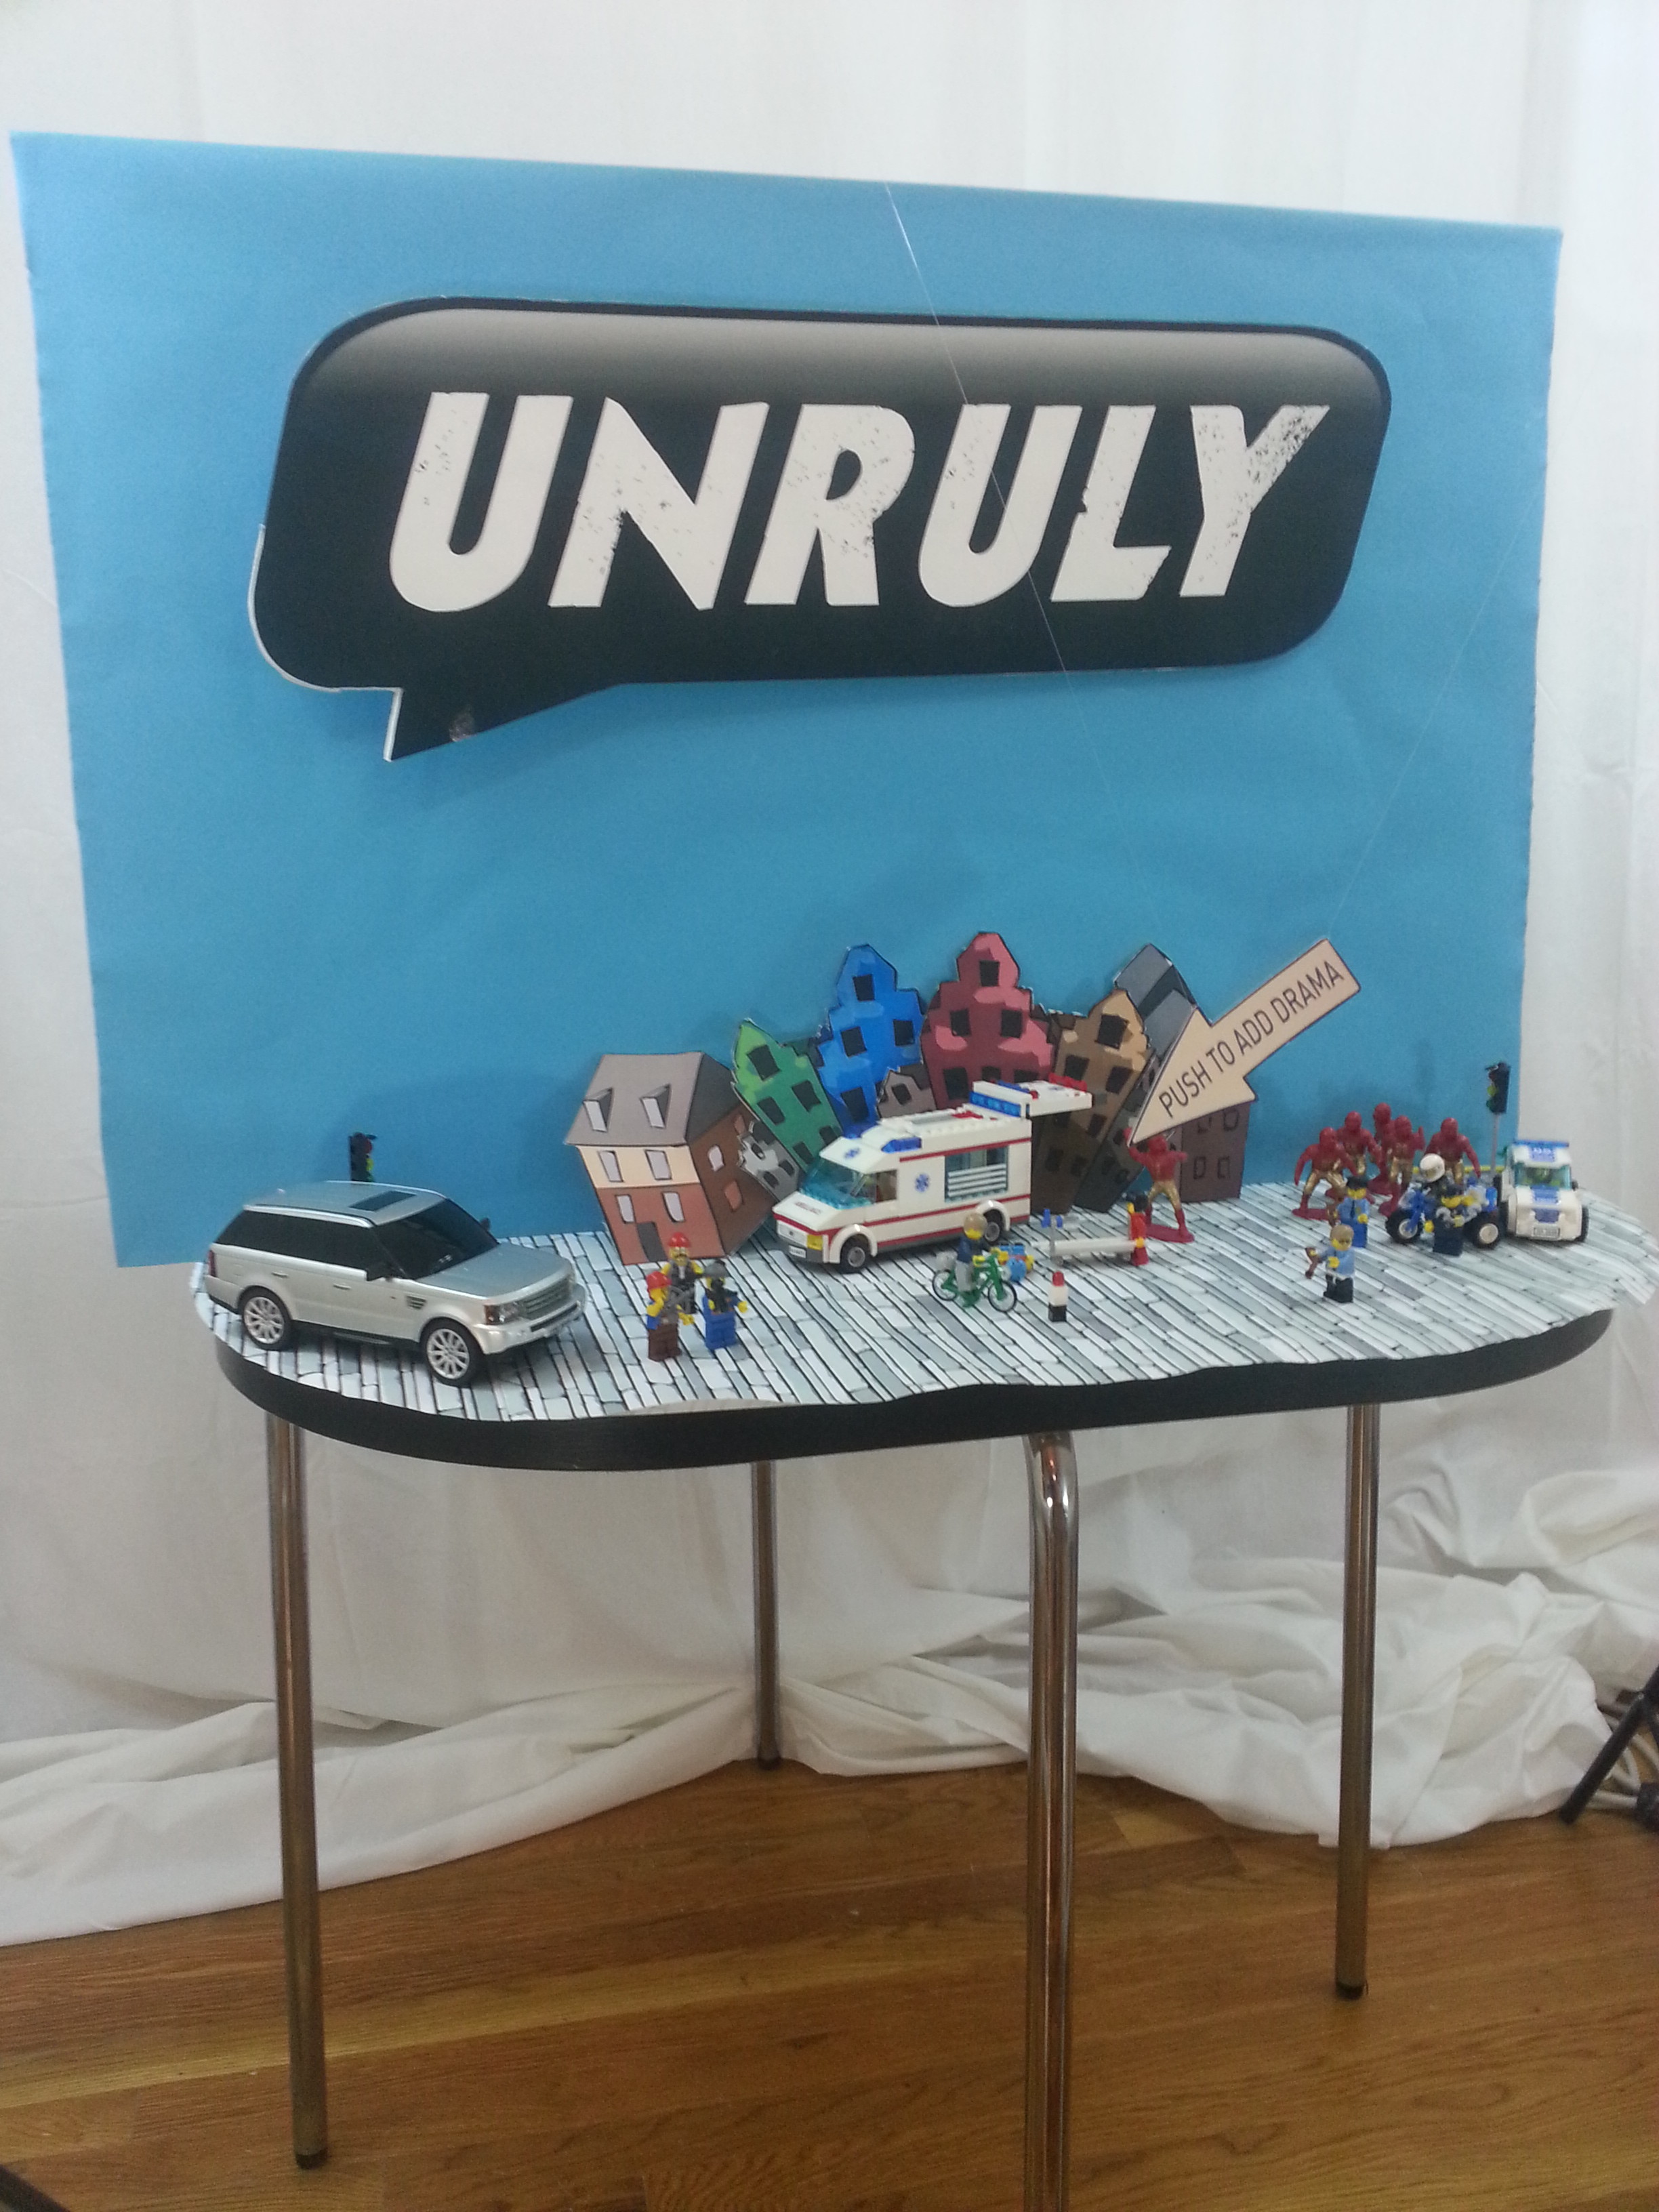 Advertisers Only Pay for Video Views after 30 Seconds with Unruly’s New Pricing Model